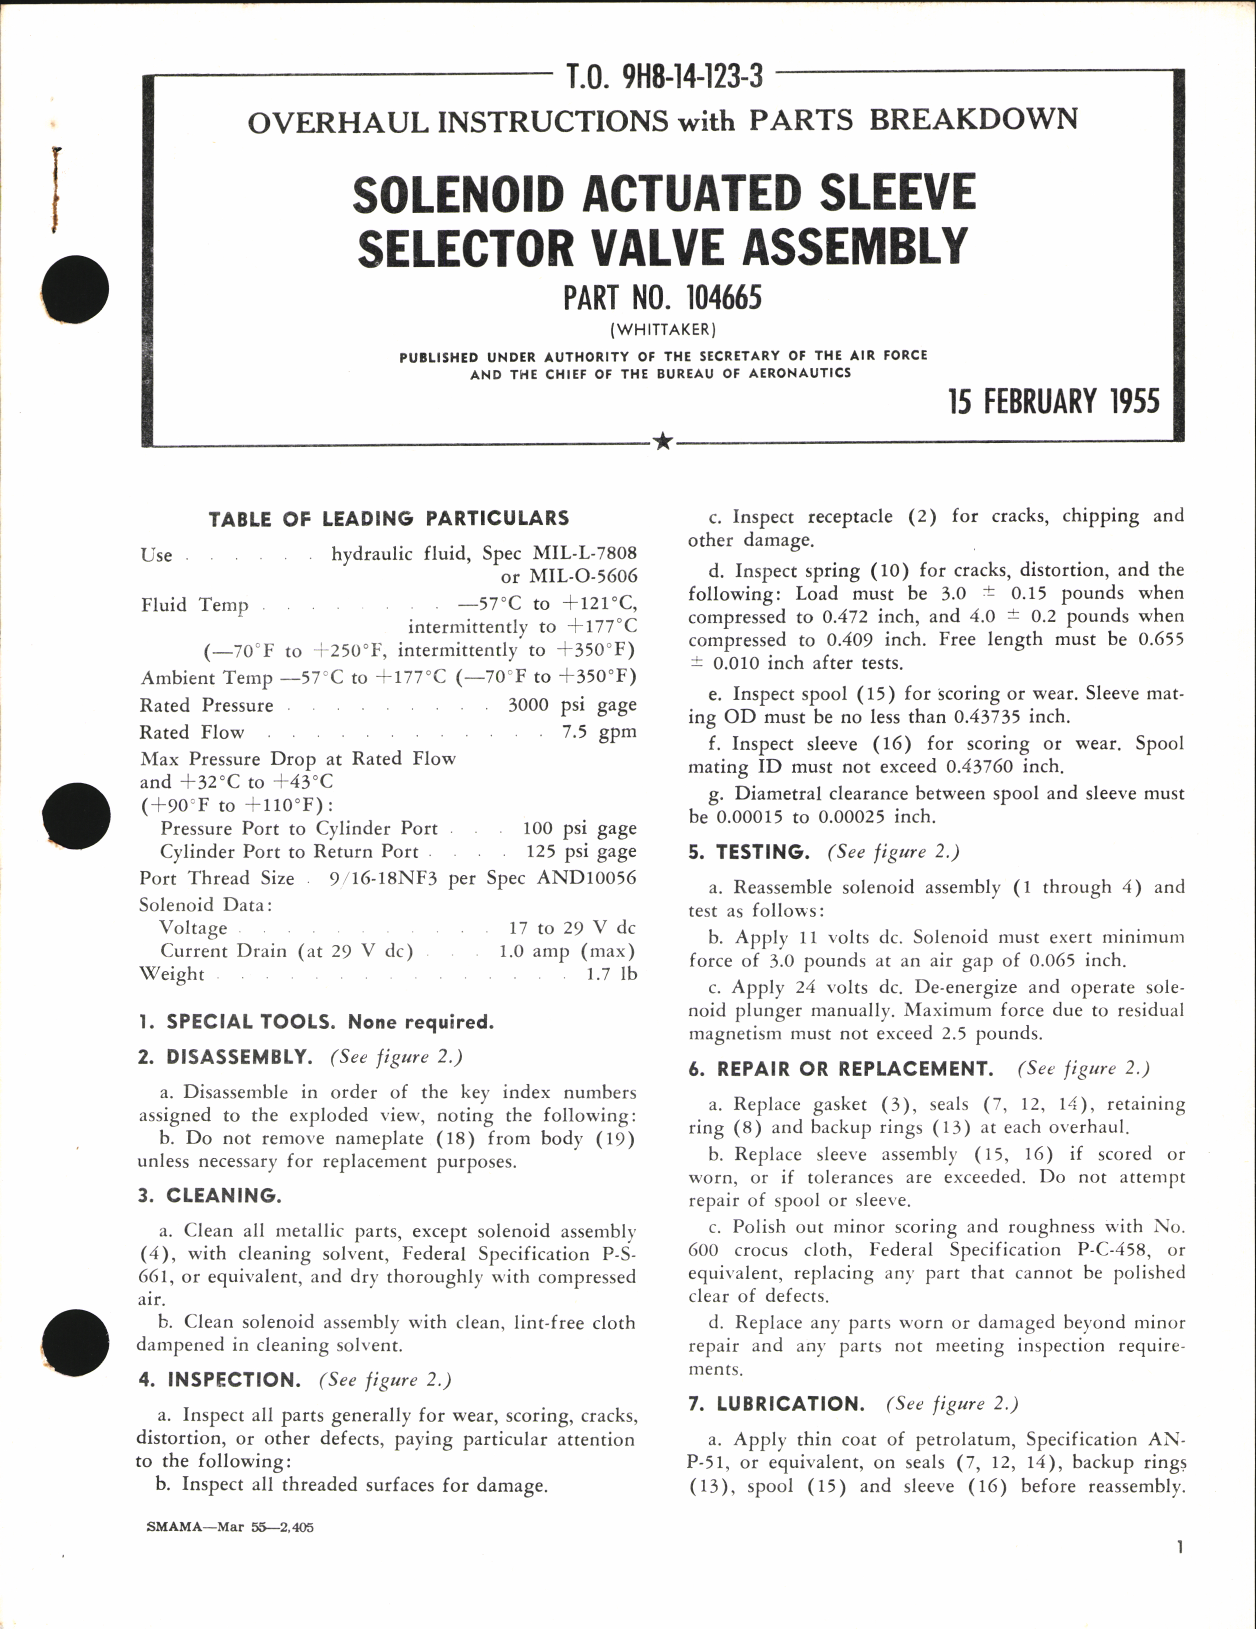 Sample page 1 from AirCorps Library document: Overhaul Instructions with Parts Breakdown for Solenoid Actuated Sleeve Selector Valve Assembly Part No. 104665